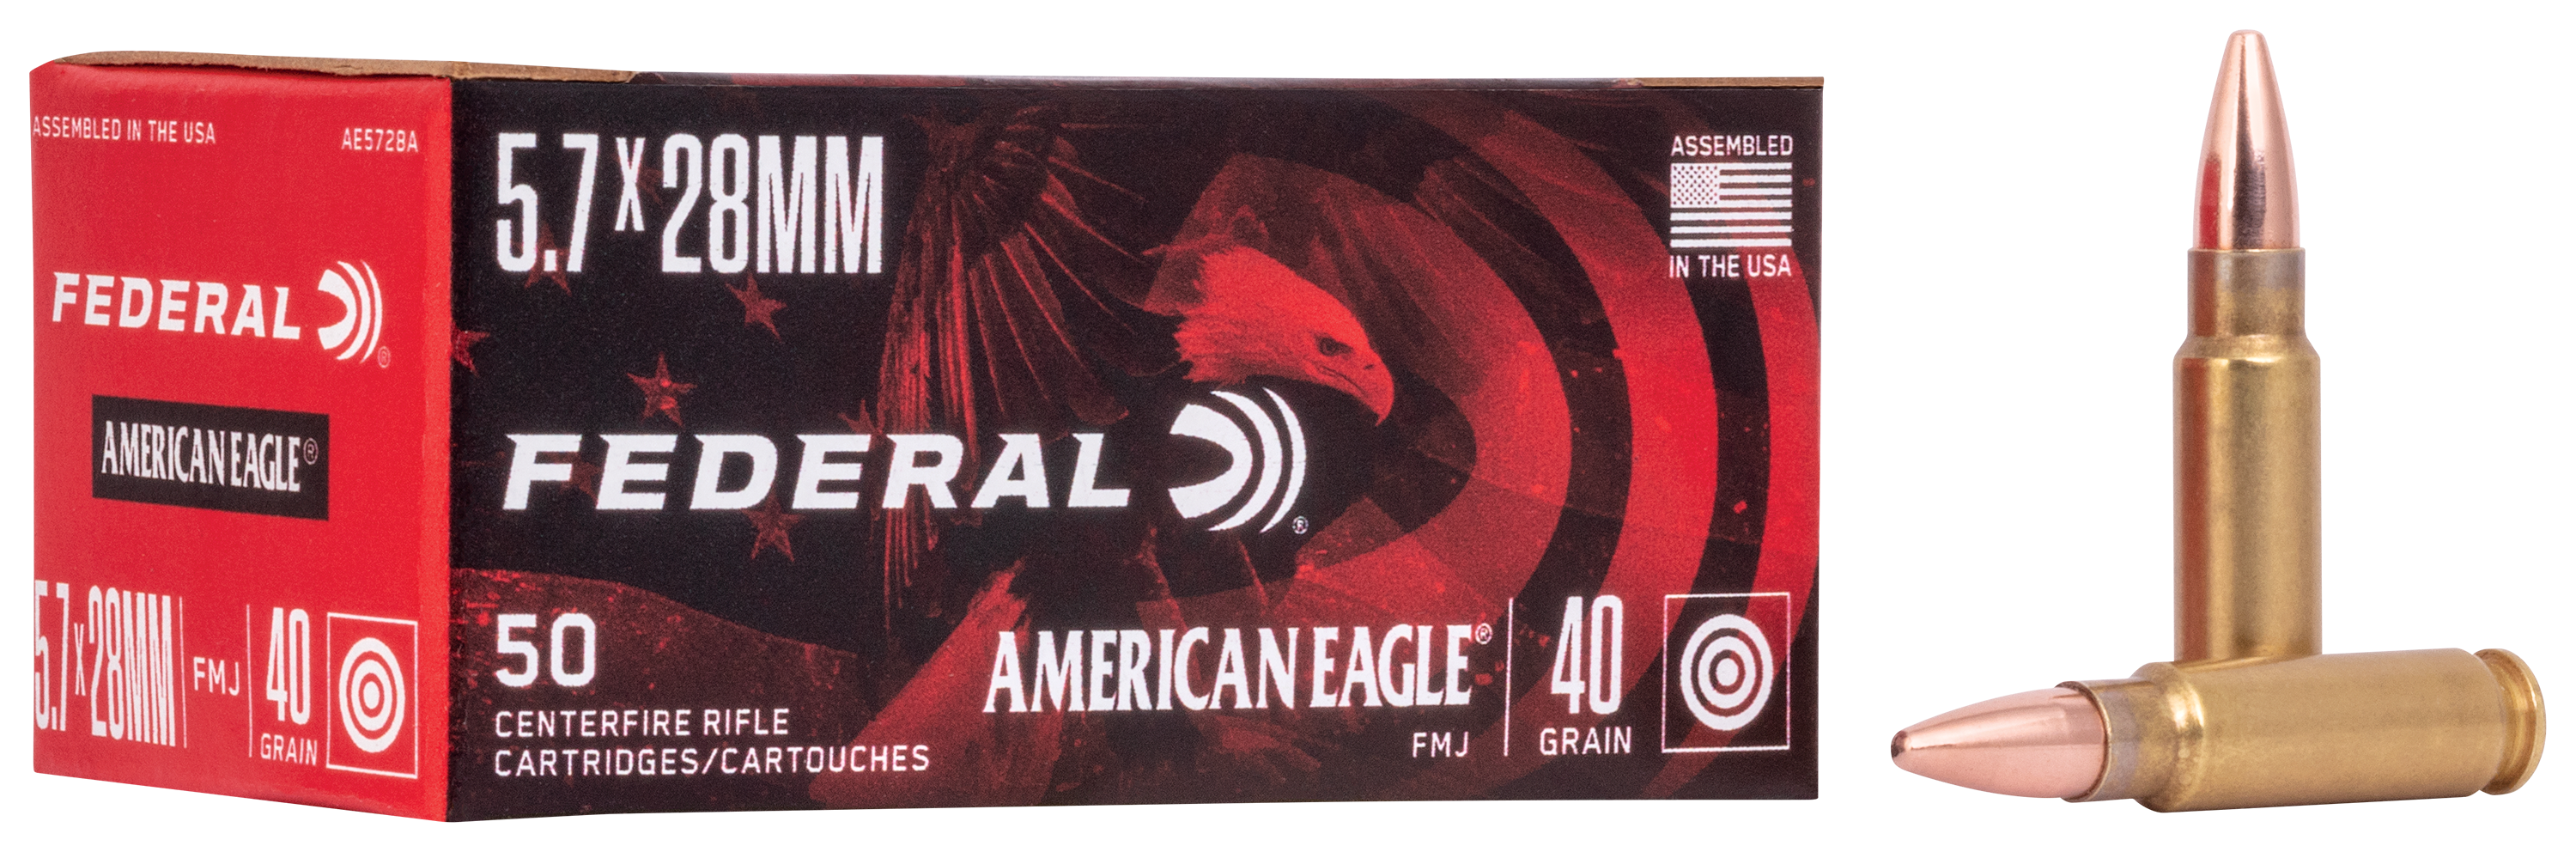 Federal American Eagle Centerfire Rifle Ammo - Full Metal Jacket - 40 Grain - 5.7x28mm - 50 Rounds